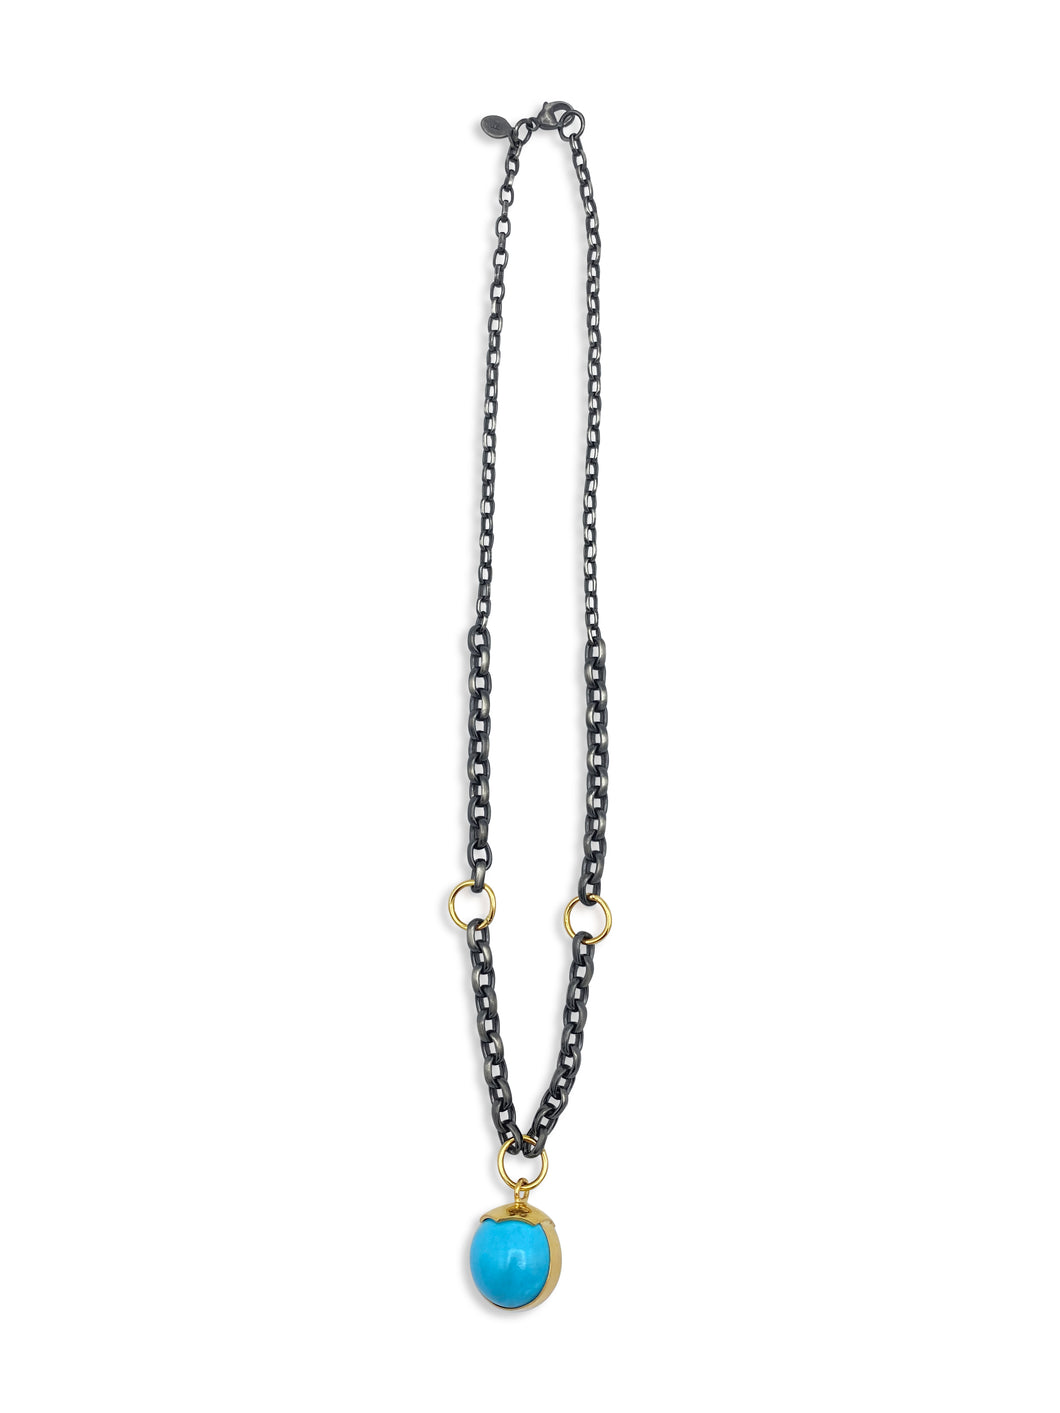 TURQUOISE SPHERE NECKLACE